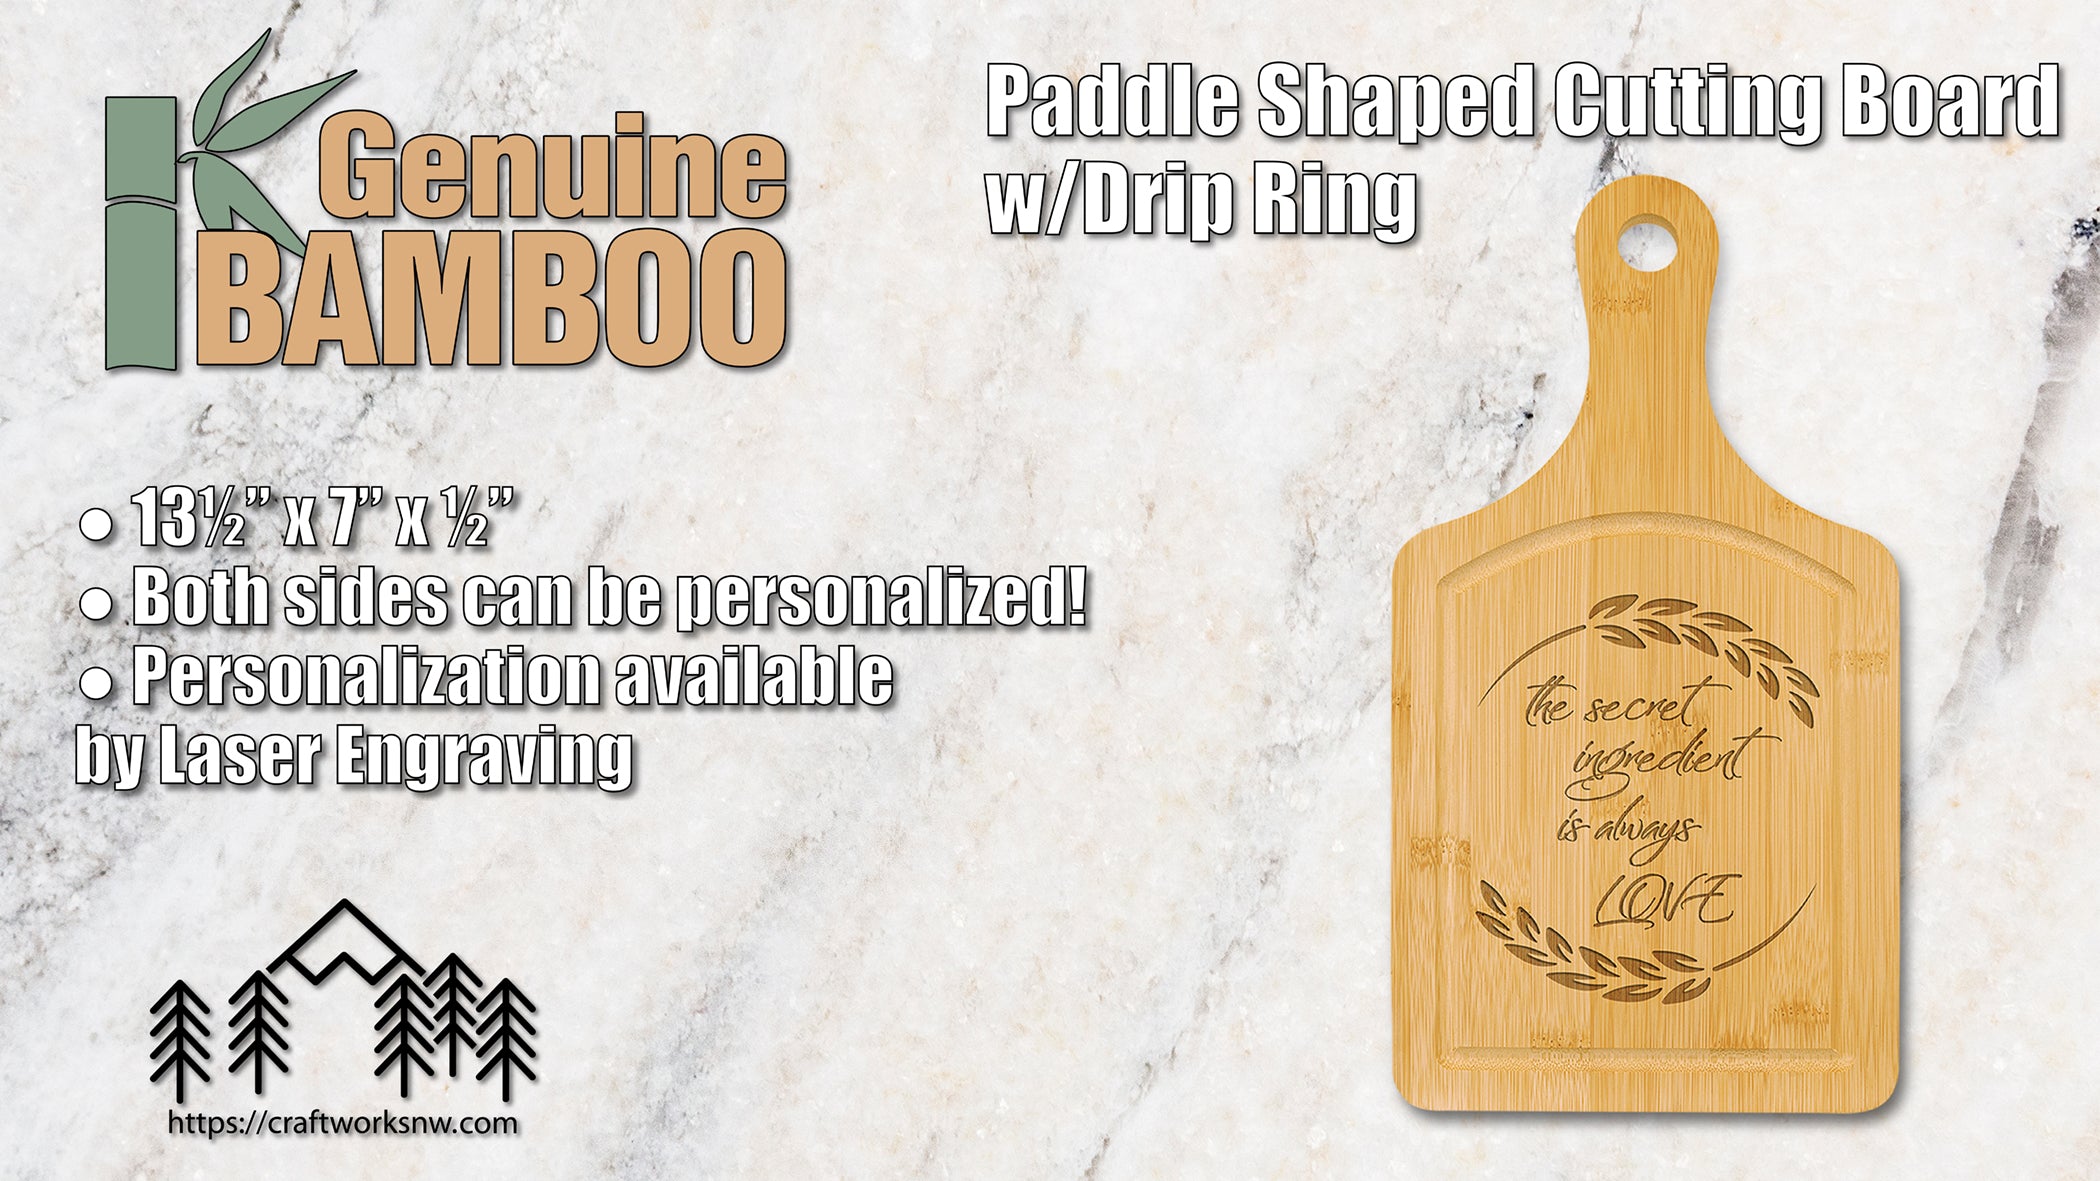 Paddle Shaped Bamboo Cutting Board w/Drip Ring, 13-1/2" x 7", Laser Engraved - Craftworks NW, LLC